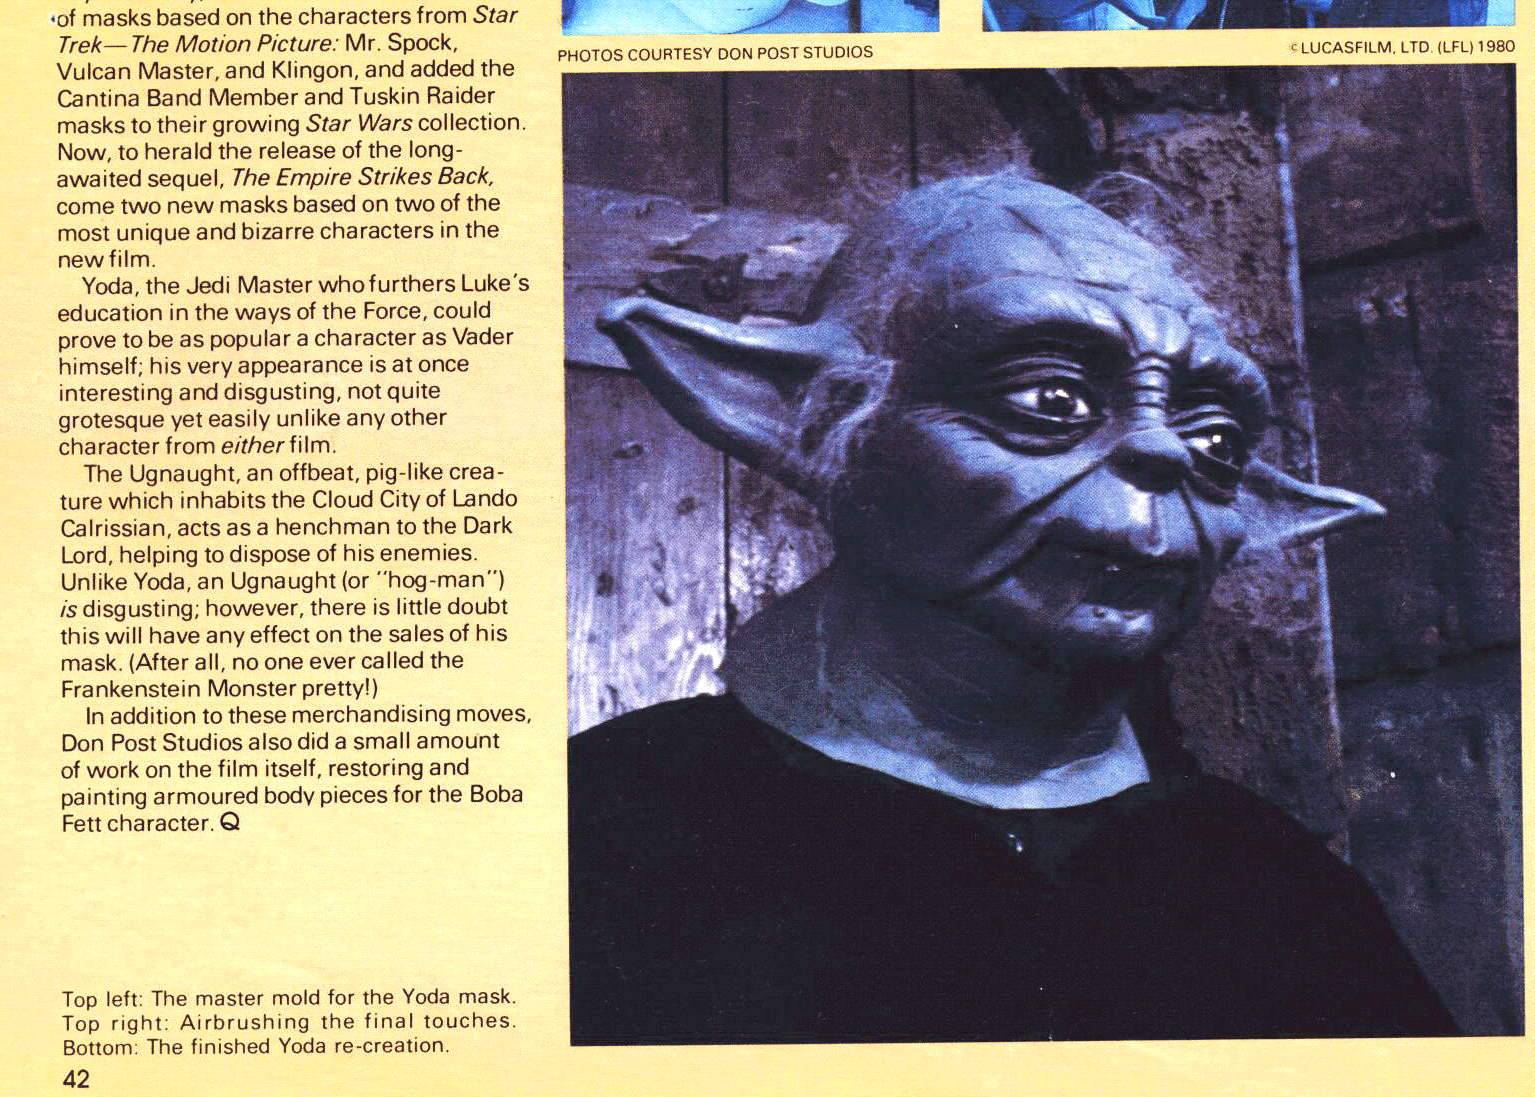 Bottom of article on Don Post masks from Questar Magazine